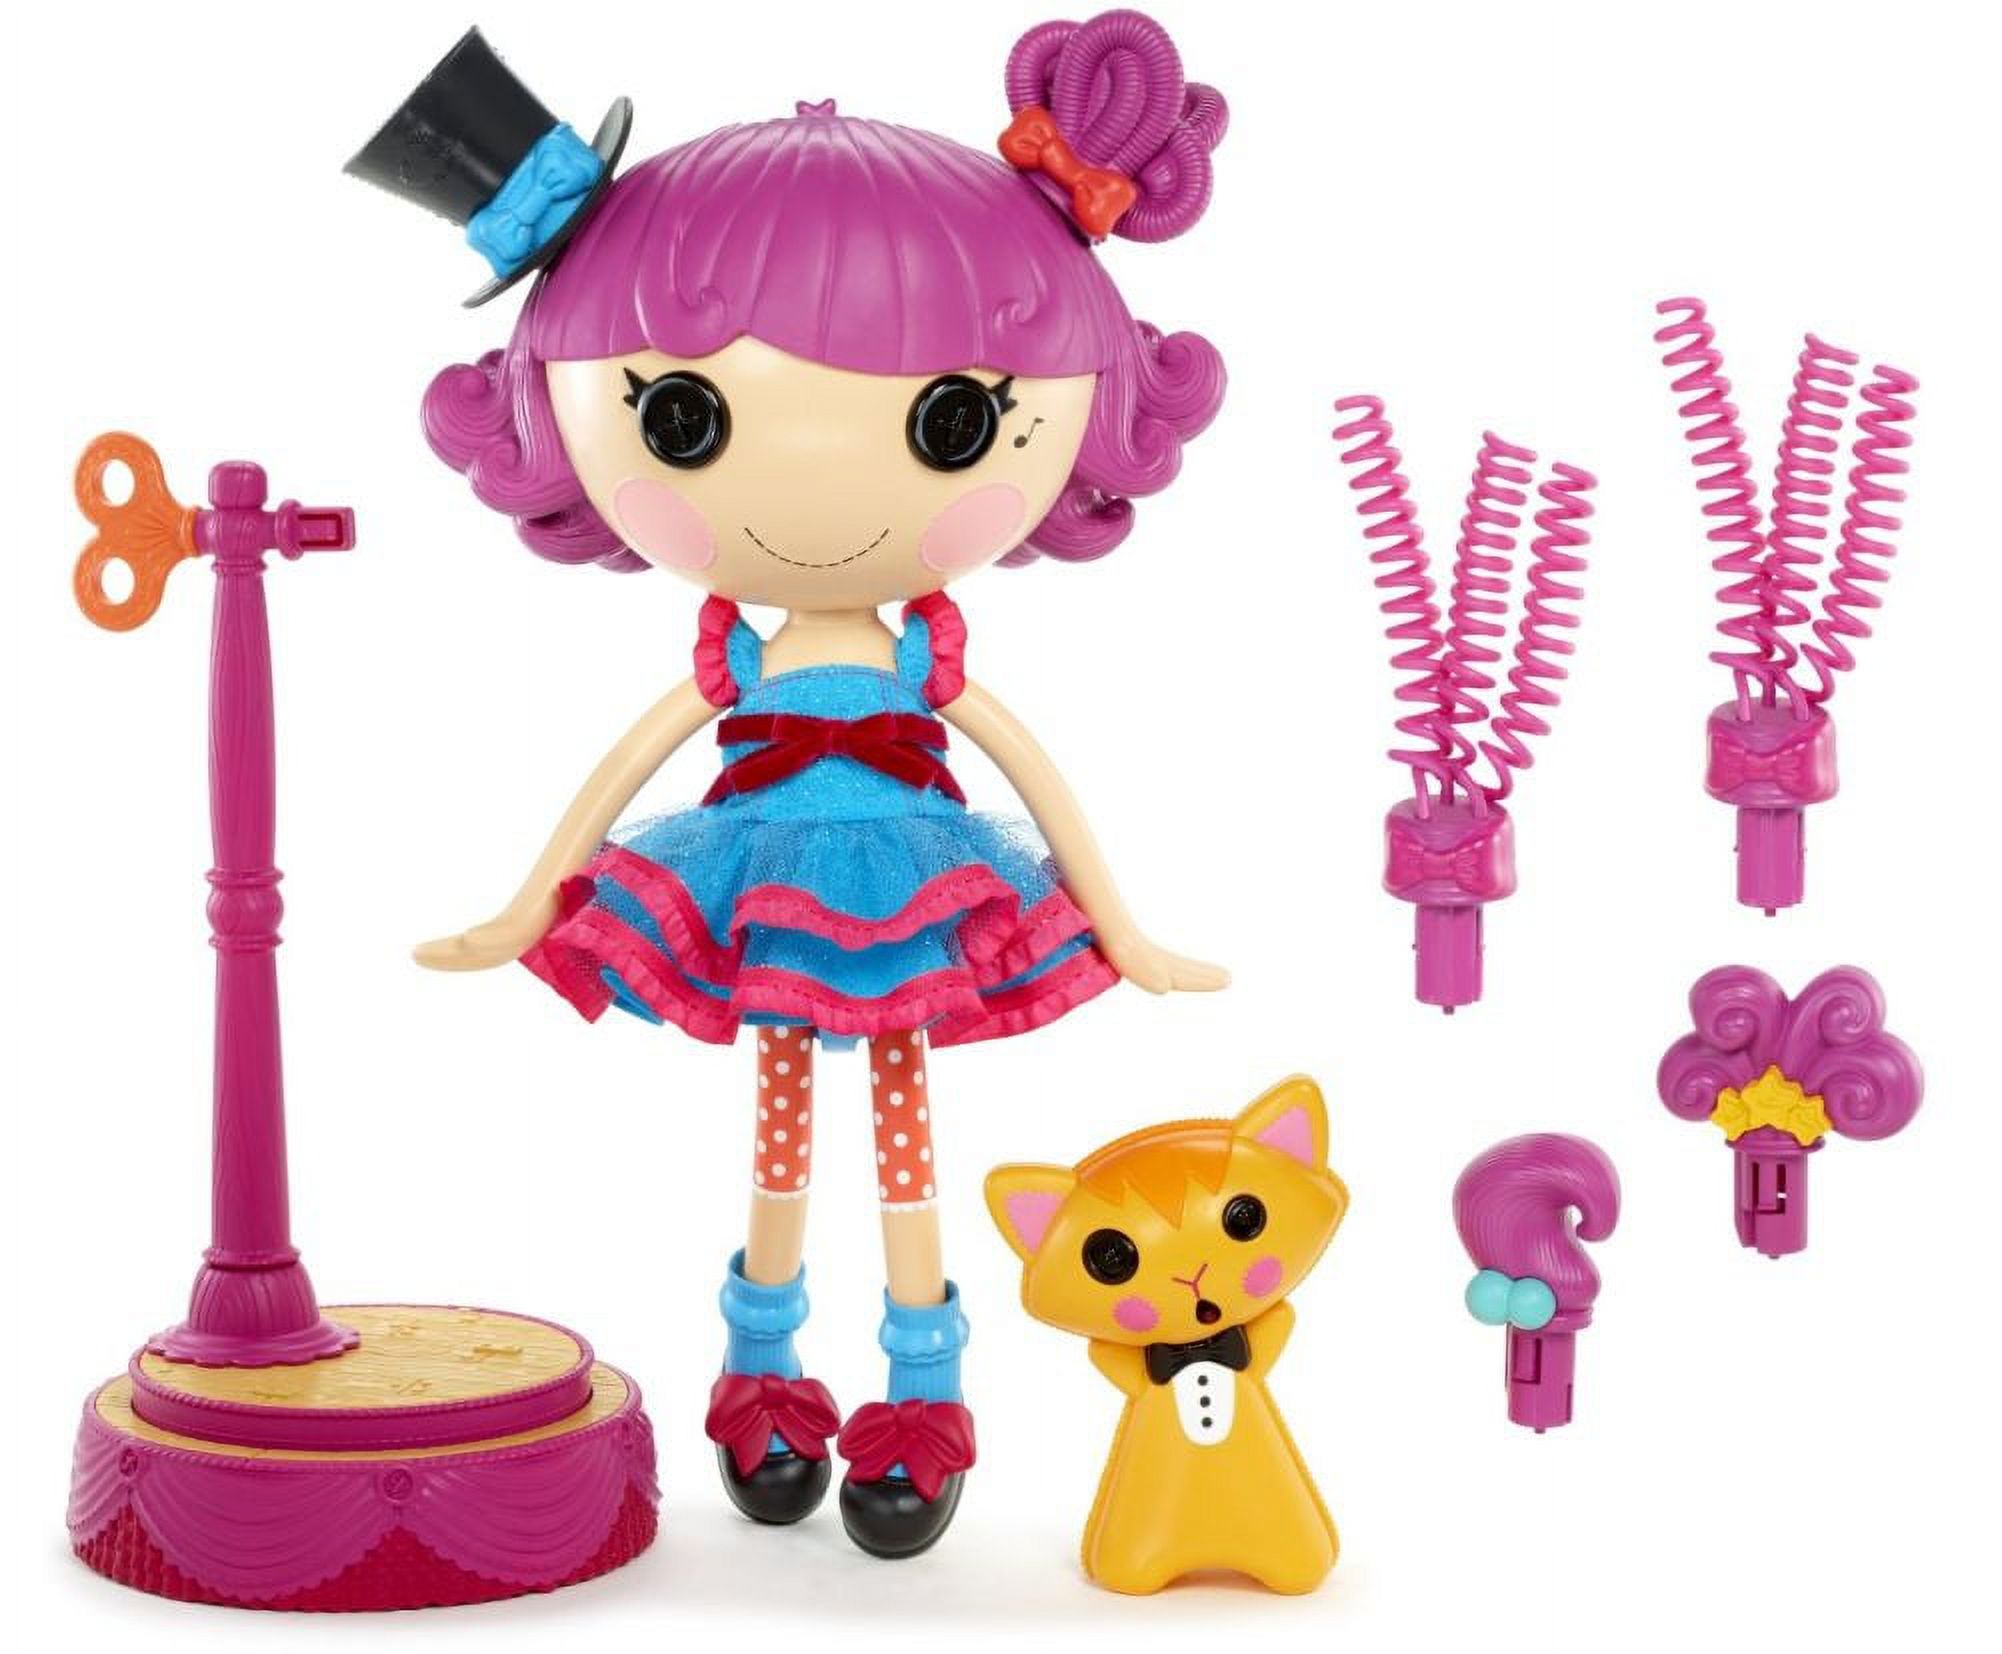 Moxie Girlz Lalaloopsy Interactive Feature Doll - image 1 of 2